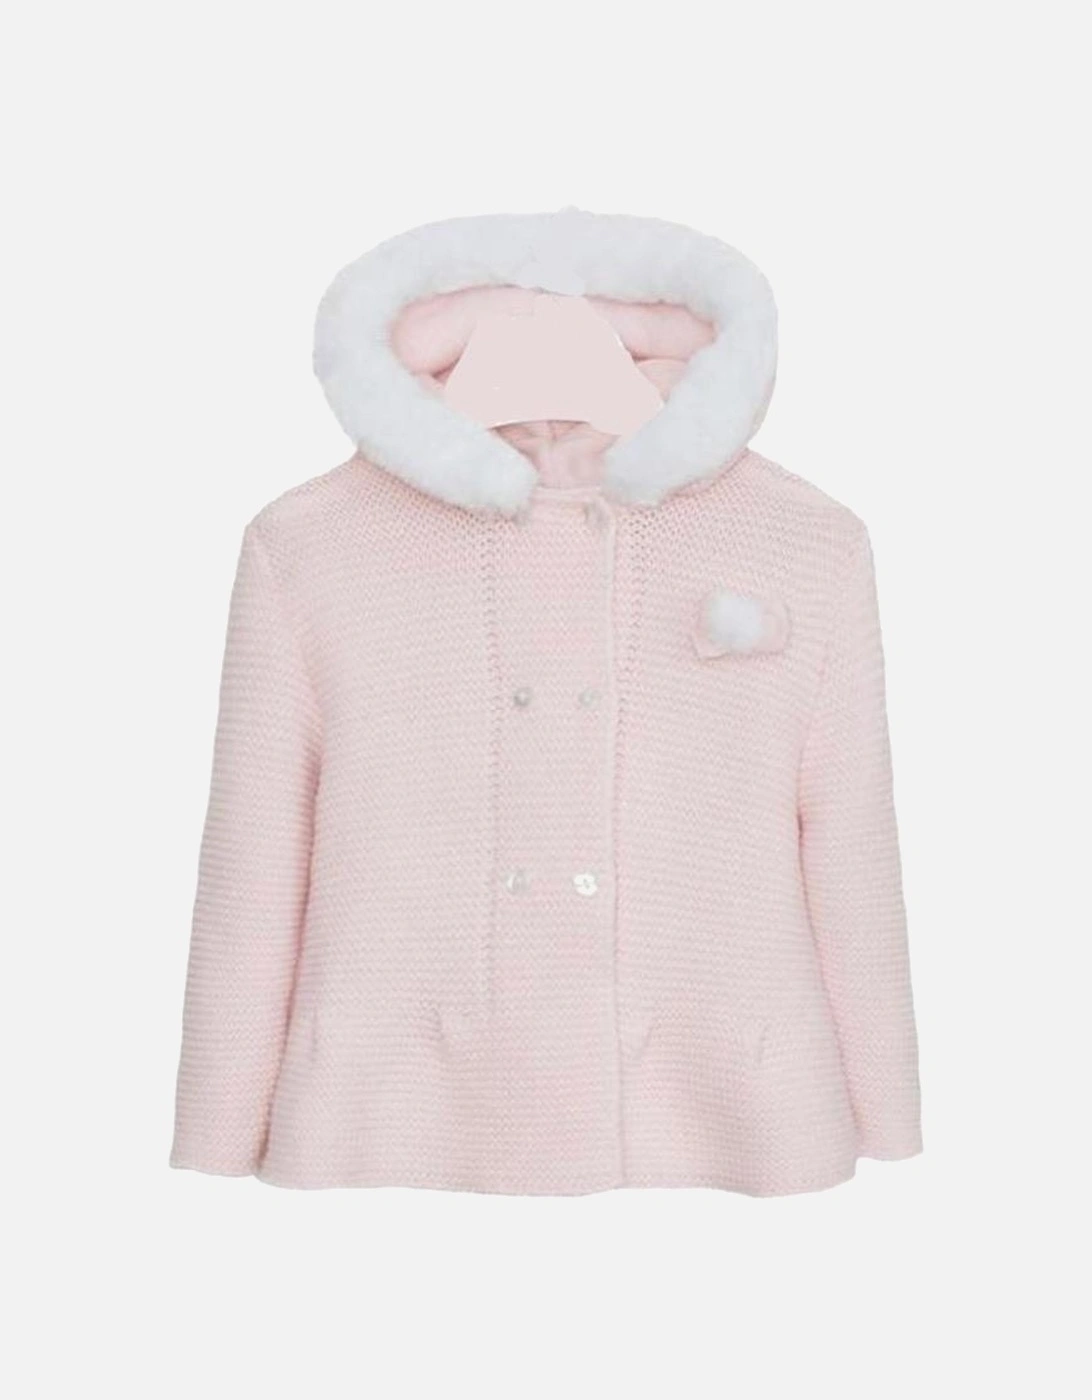 Girls Pink Knitted Jacket, 2 of 1